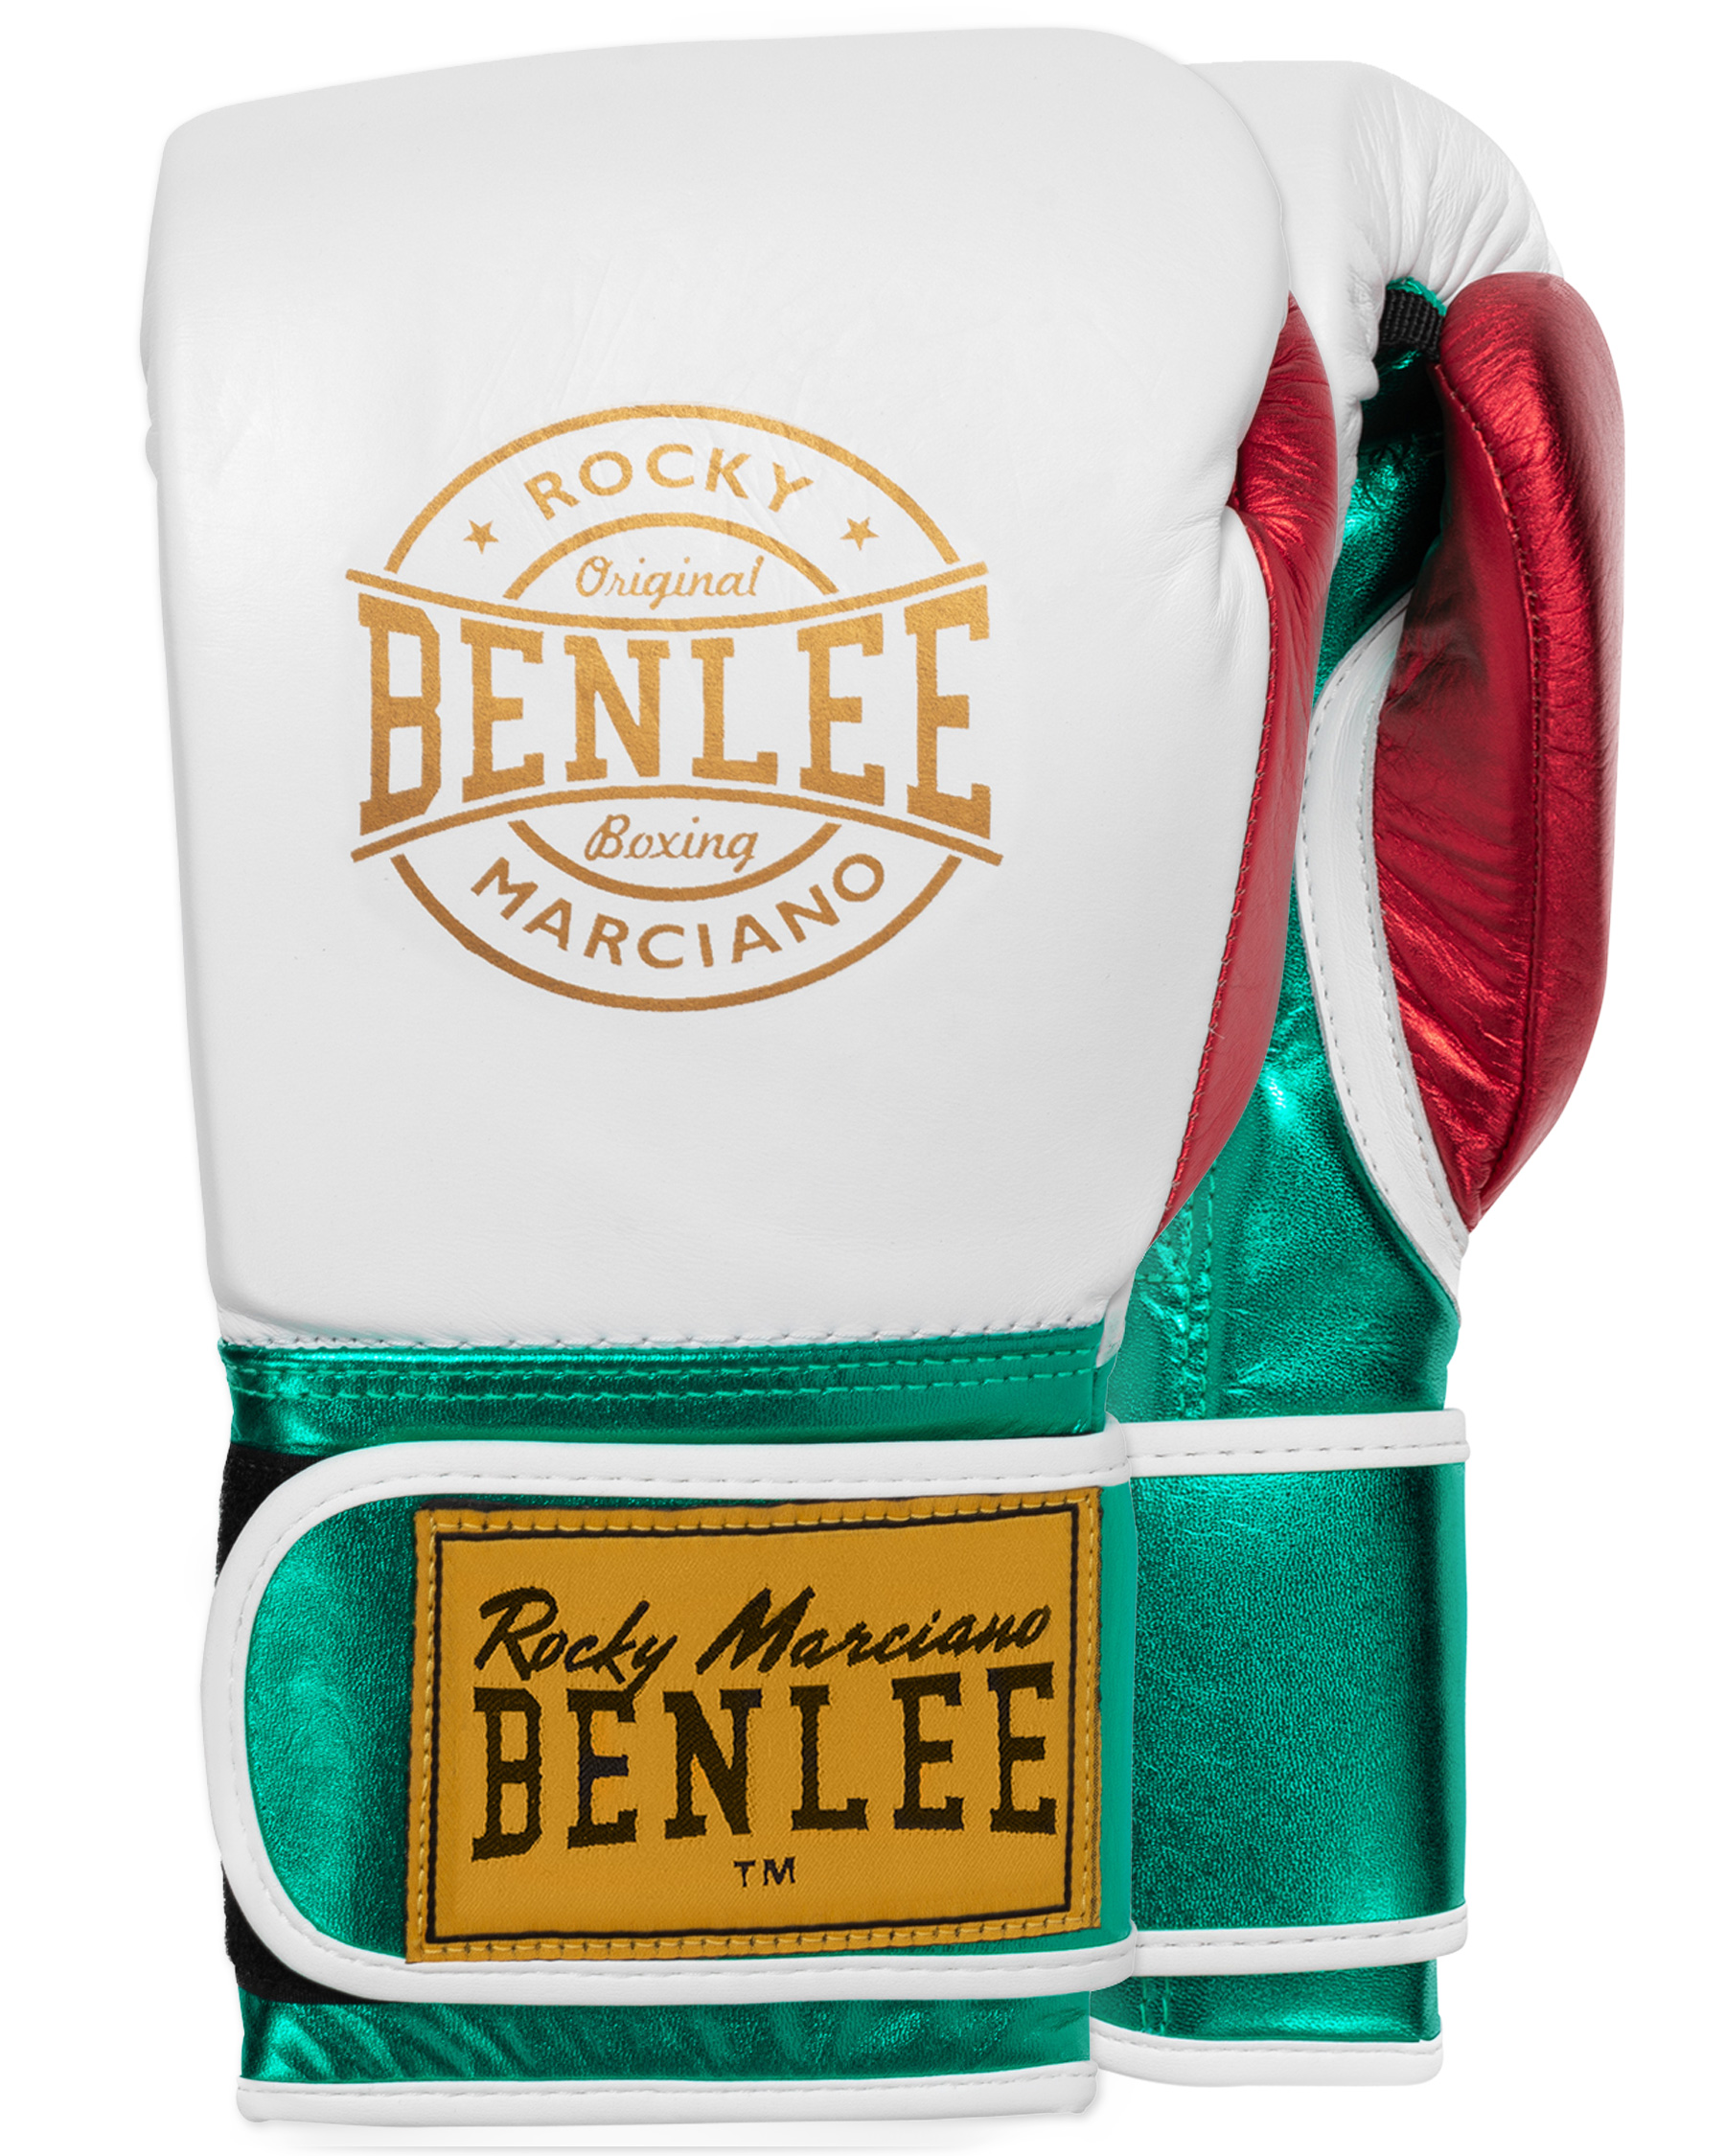 BenLee leather boxing gloves Metalshire